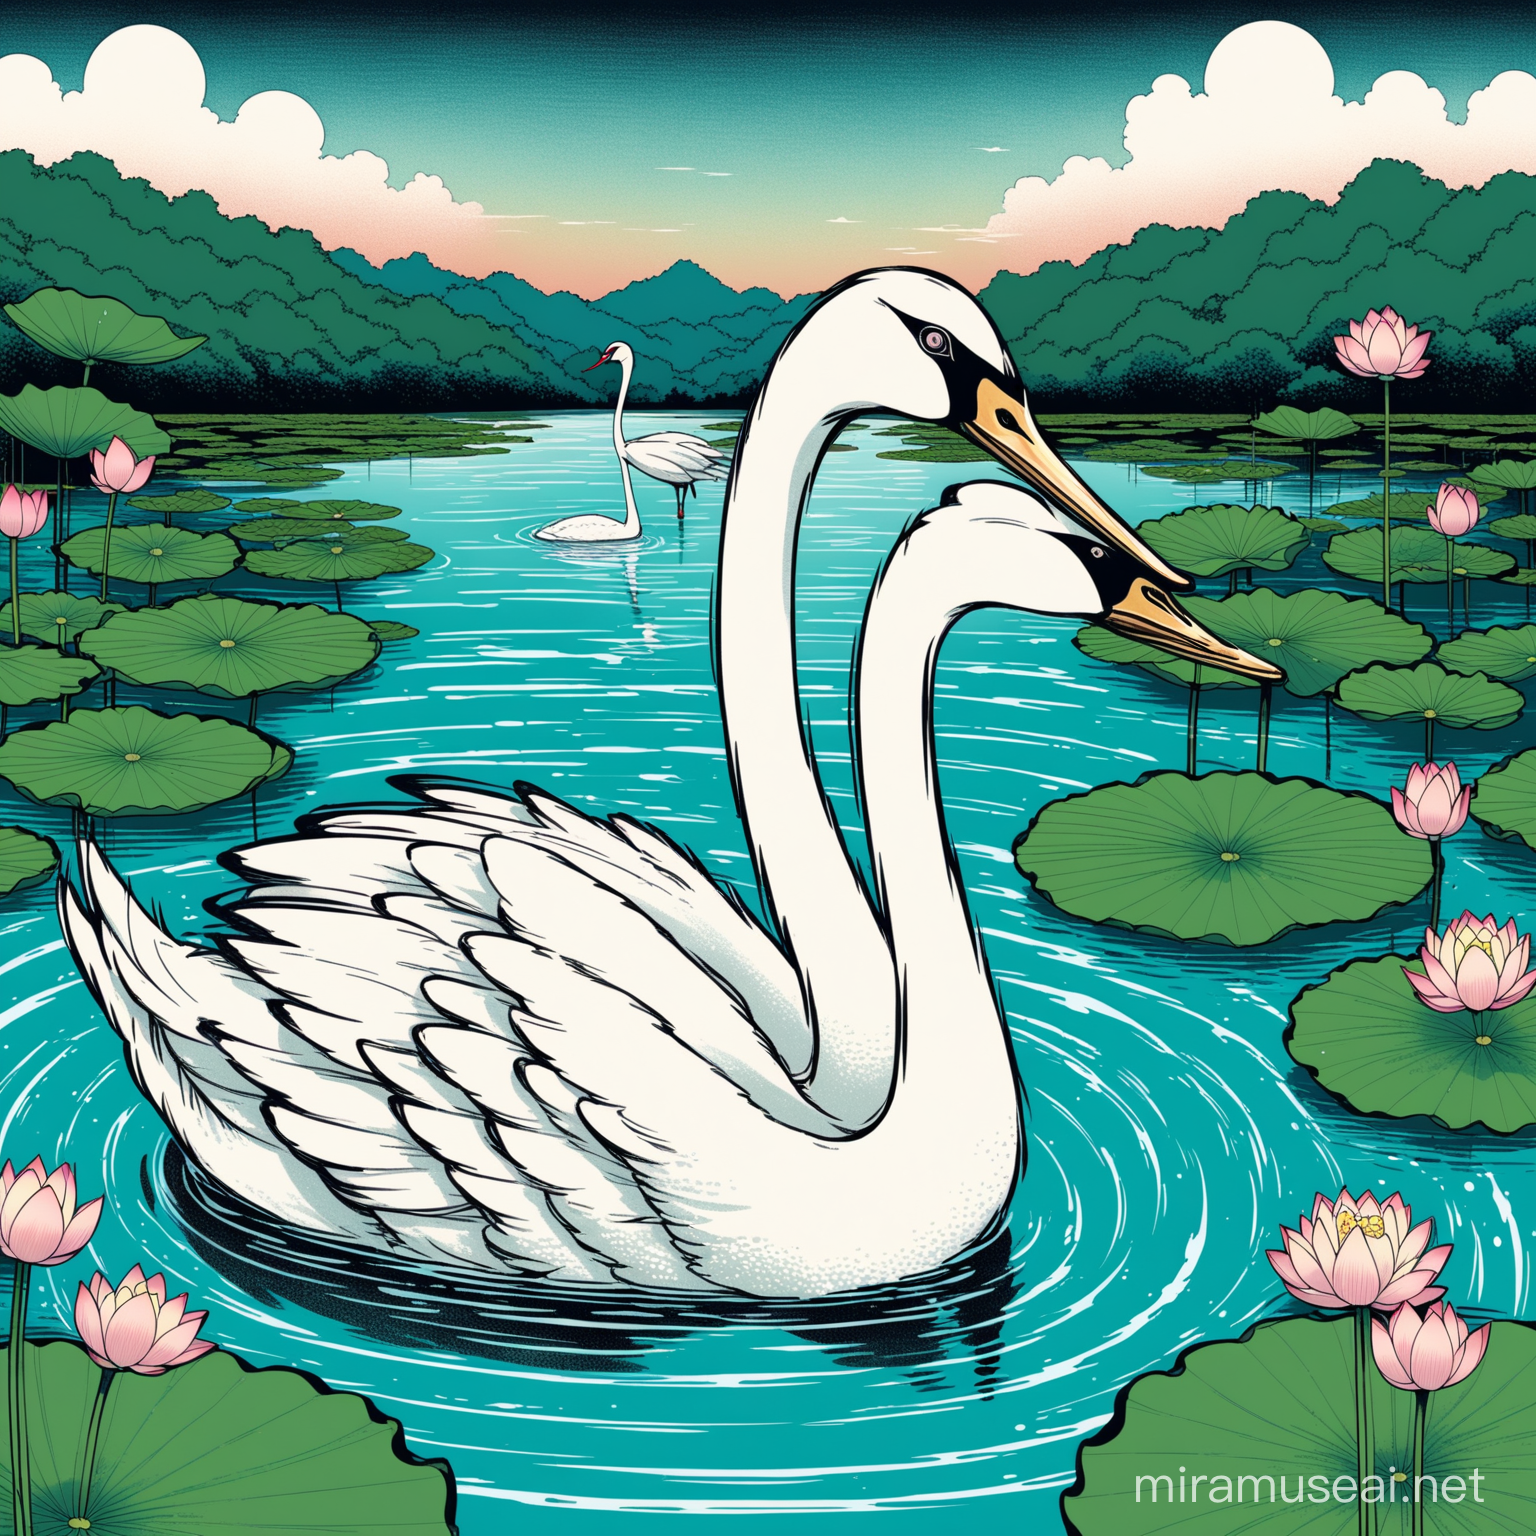 Mystical Pond Swan with Crane and Peacock Heads in Junji Ito Style